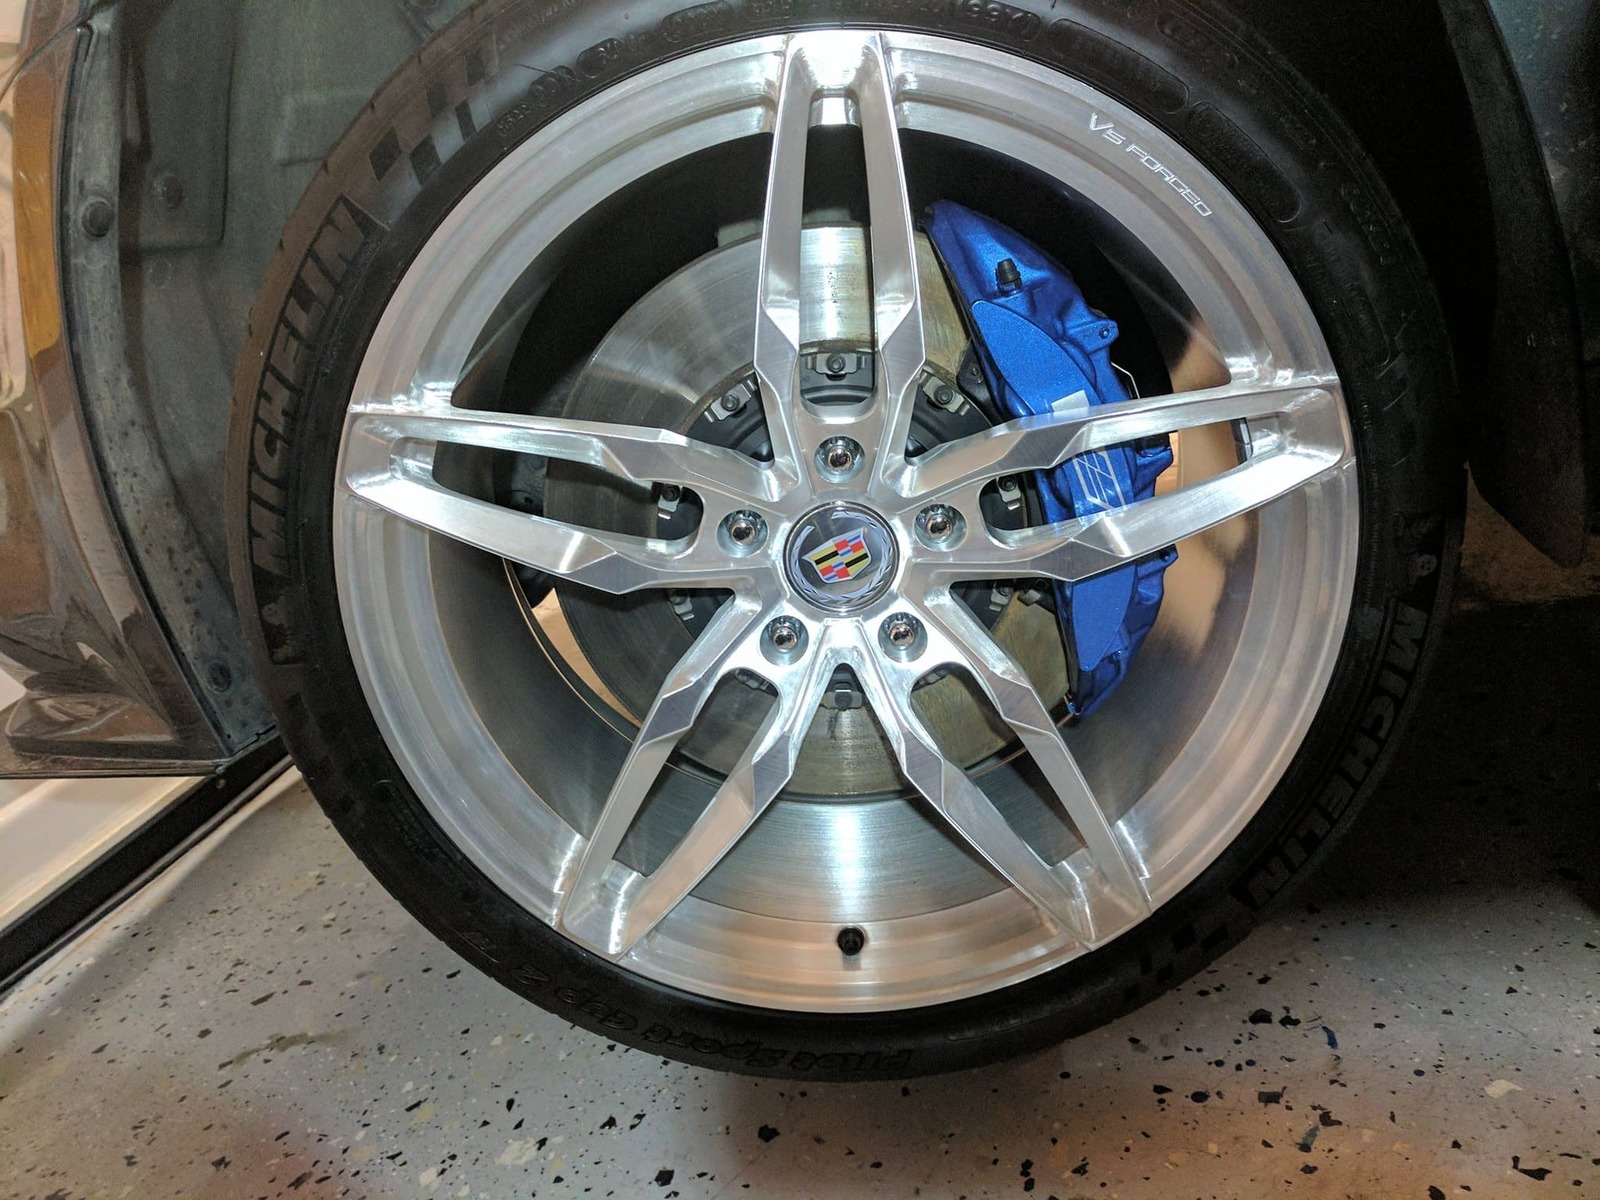 vs-forged-vs03-brushed-with-clear-concave-forged-wheels-cadillac-ctsv.jpg